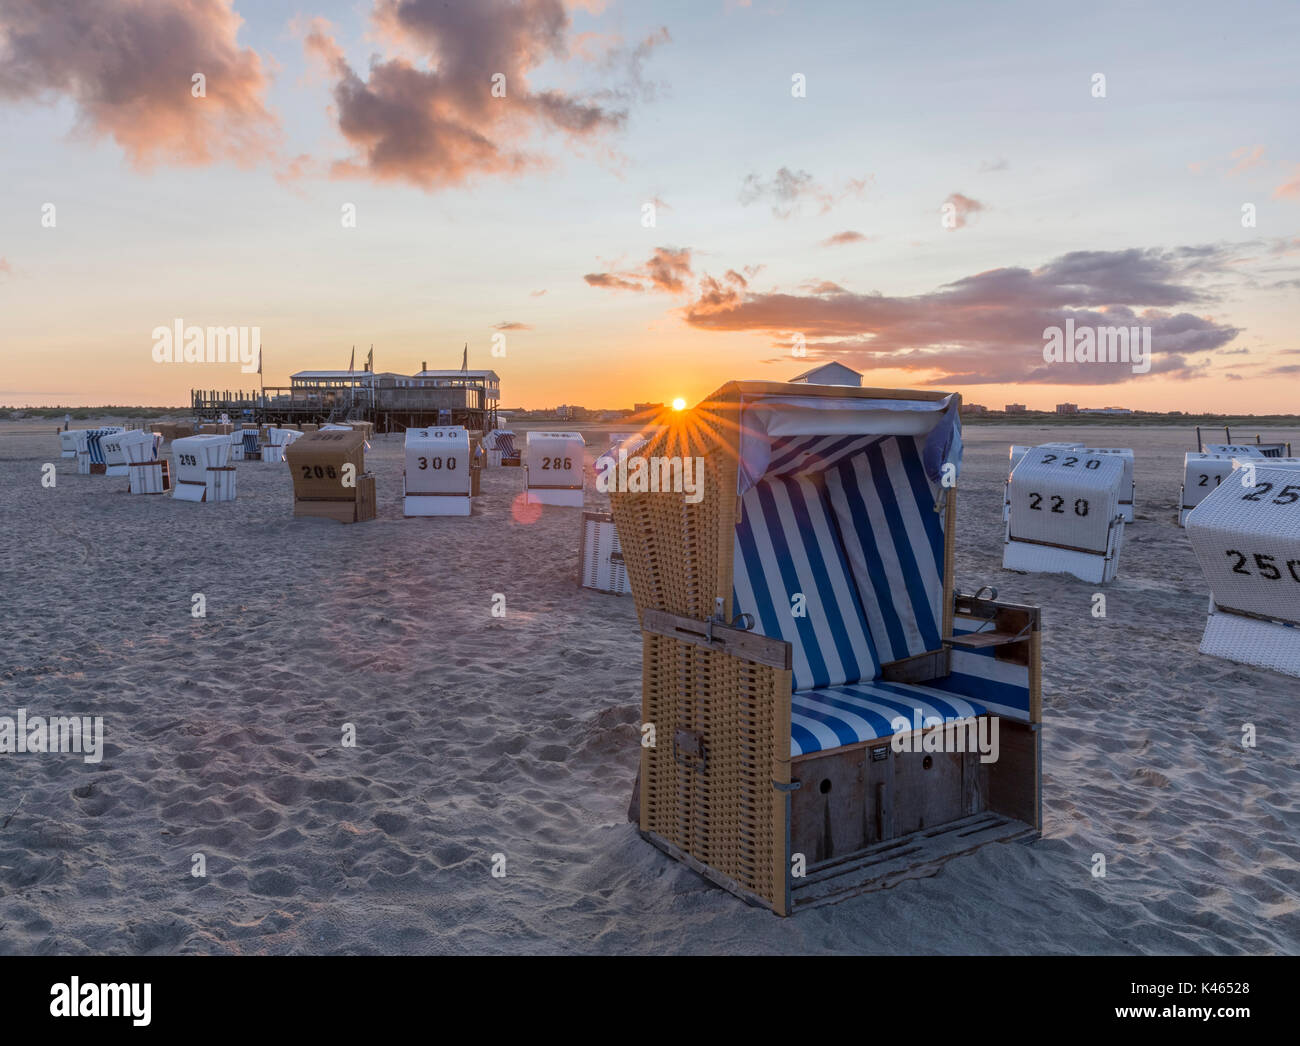 Traditional beach baskets or hooded beach chairs at nothern Germany Stock Photo